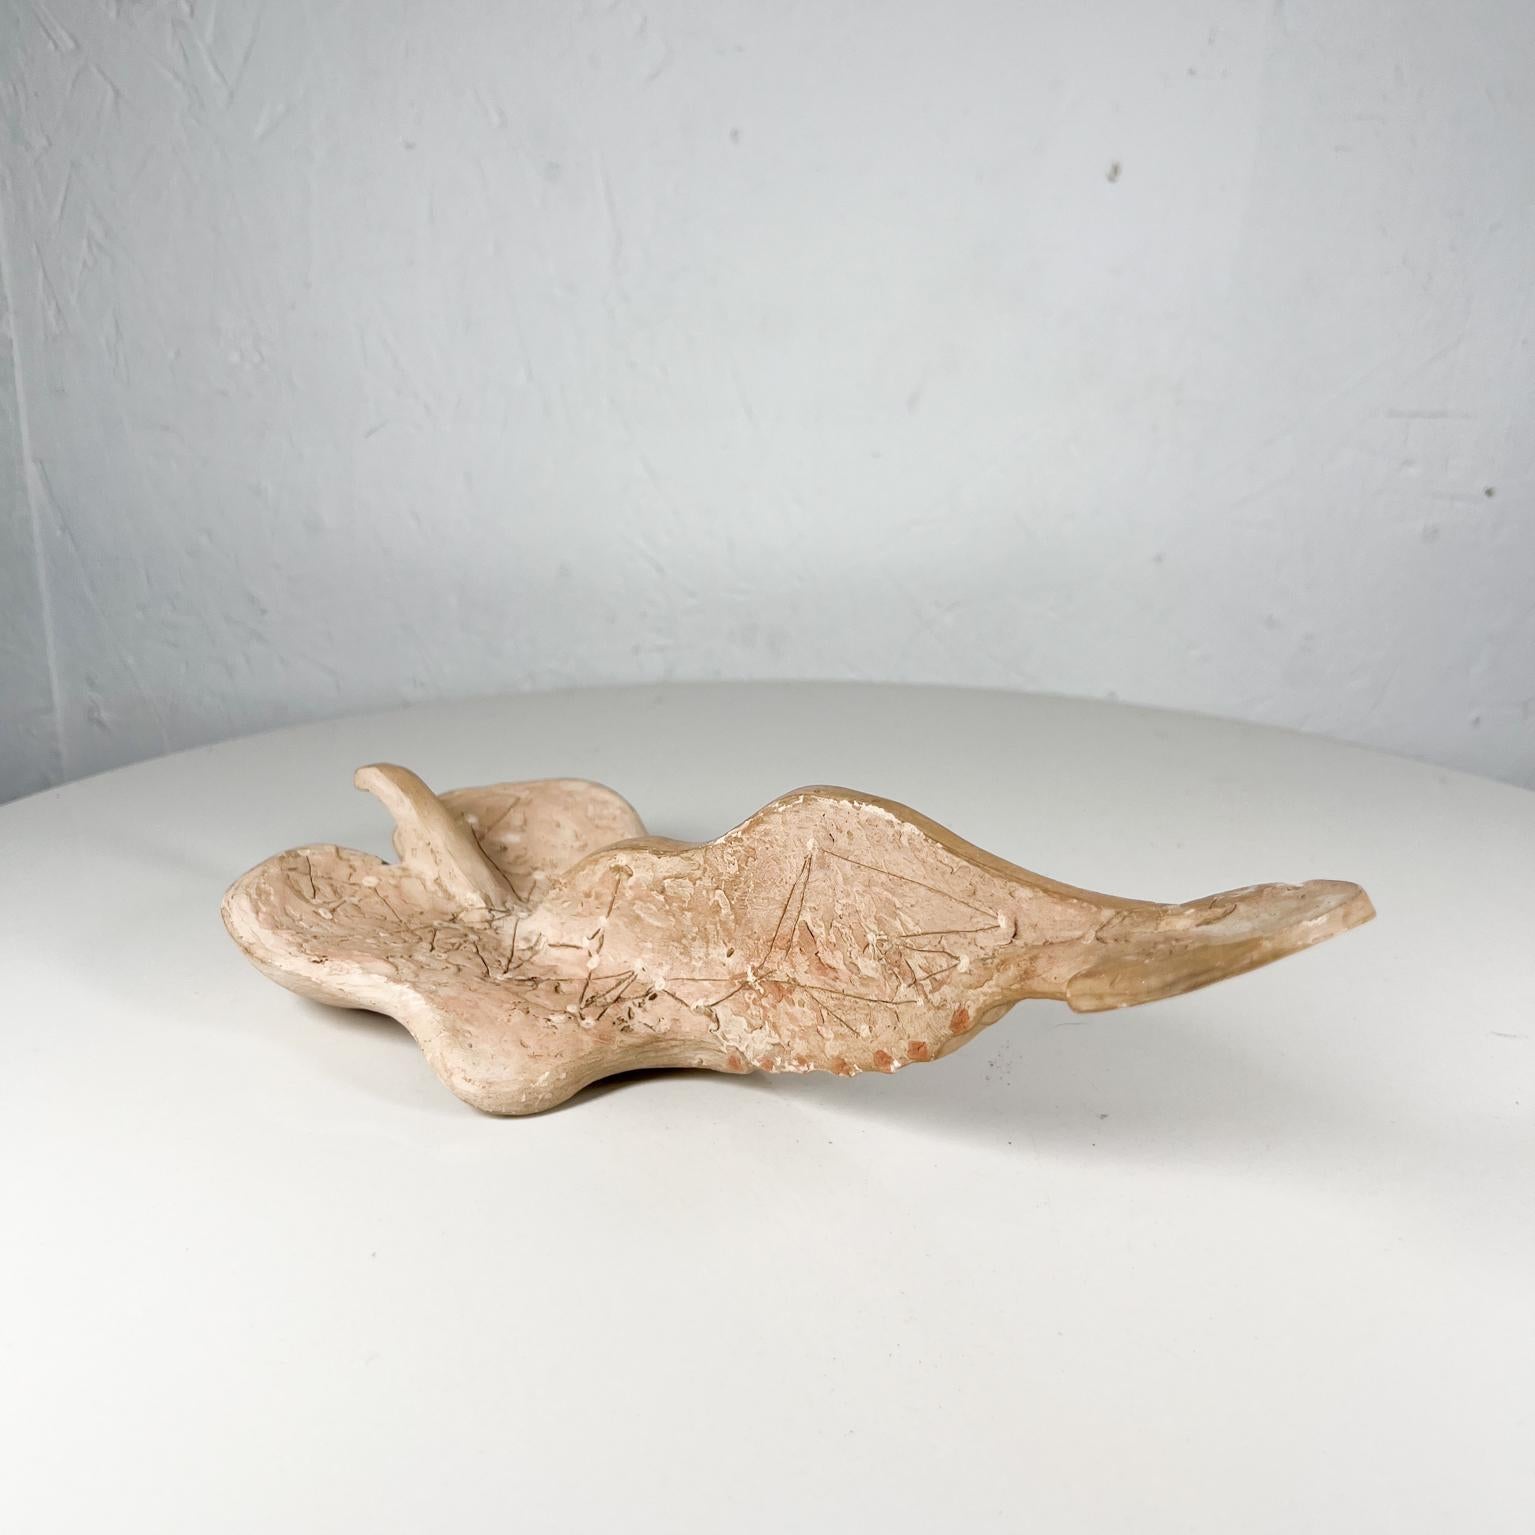 Abstract Modern Textured White Vertebrae Sculpture Pottery Art In Good Condition For Sale In Chula Vista, CA